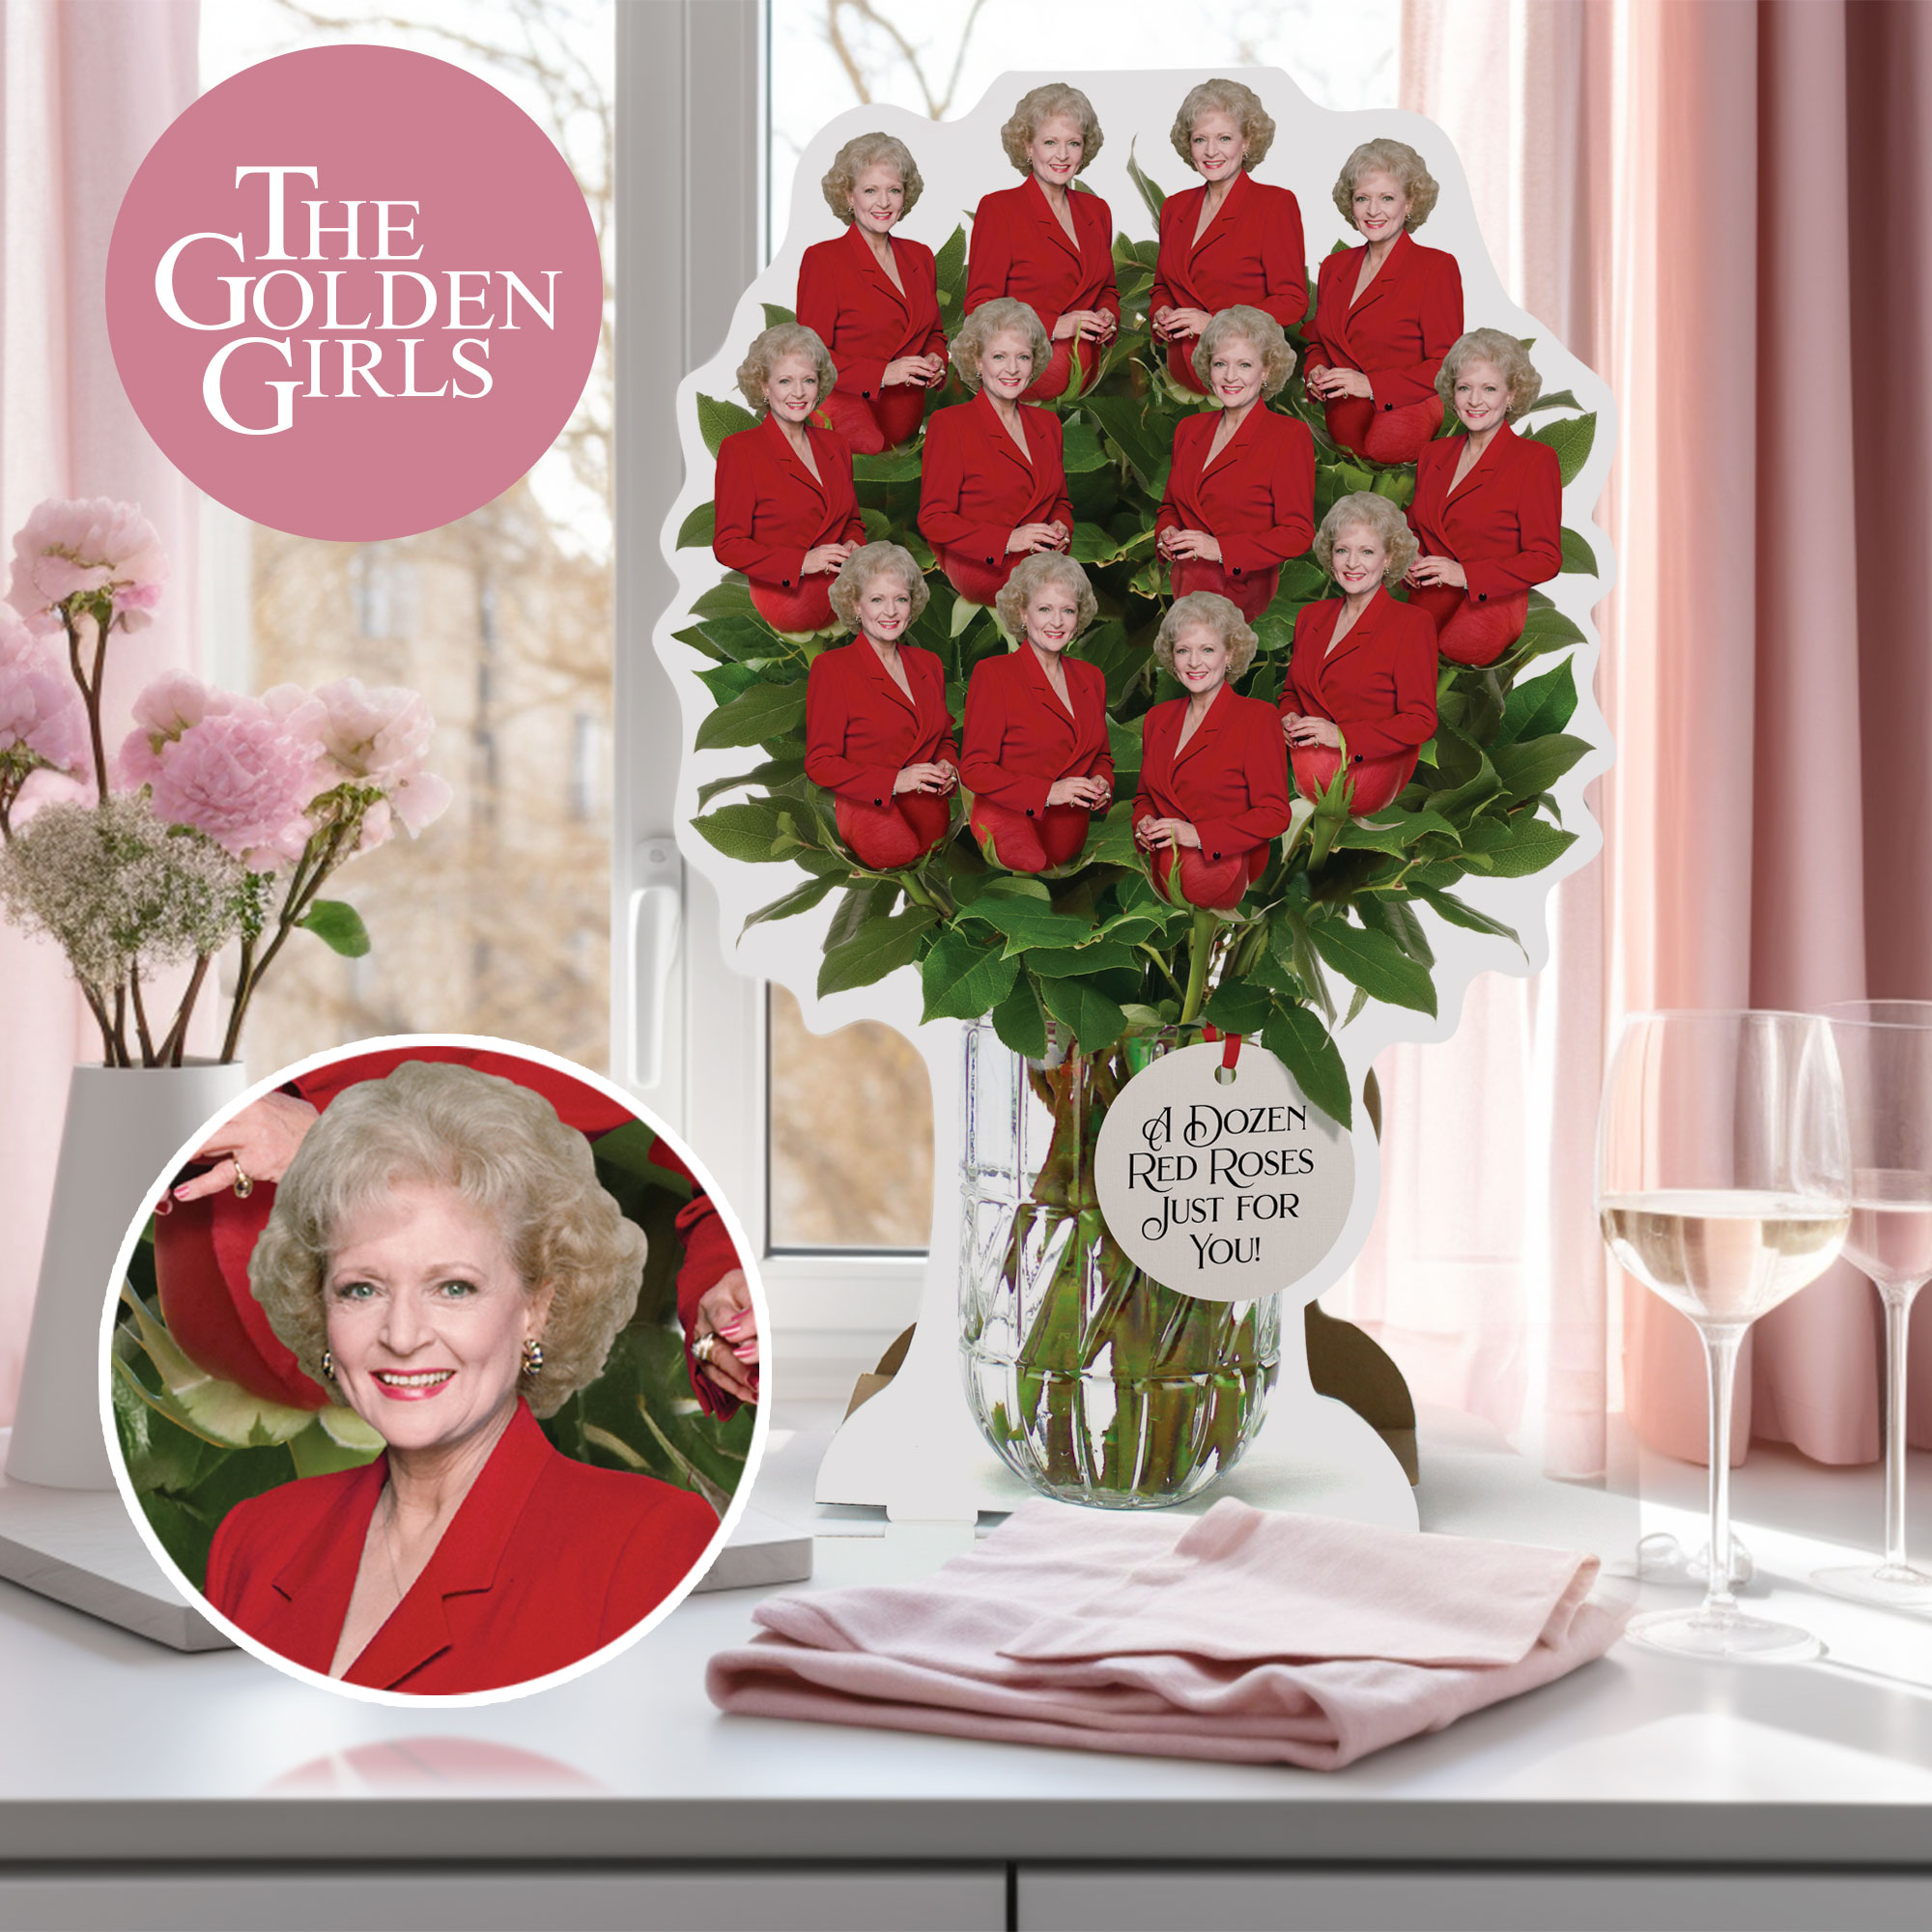 Prime Party Announces Mother's Day Gifts, Including a Dozen Red Roses ...